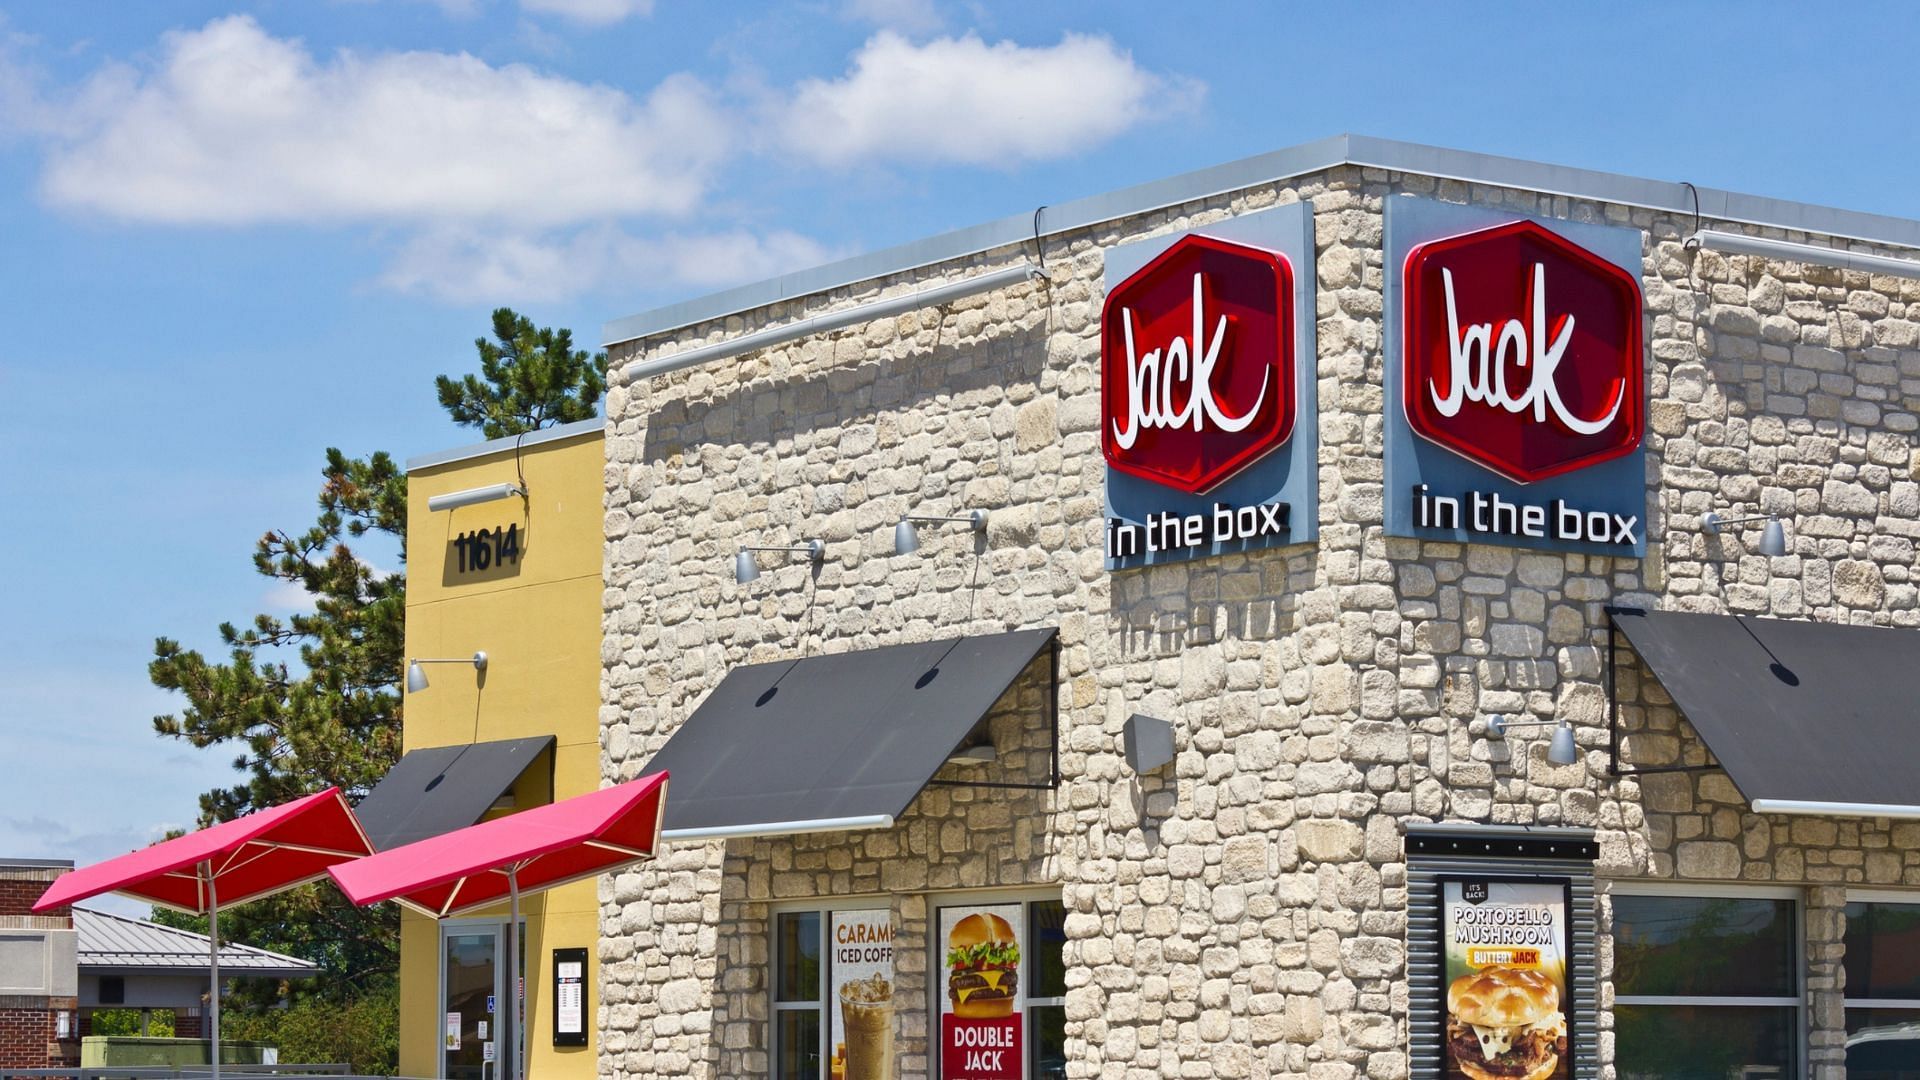 the exterior of a Jack in the Box restaurant in the United States (JetcityImage/Getty Images)